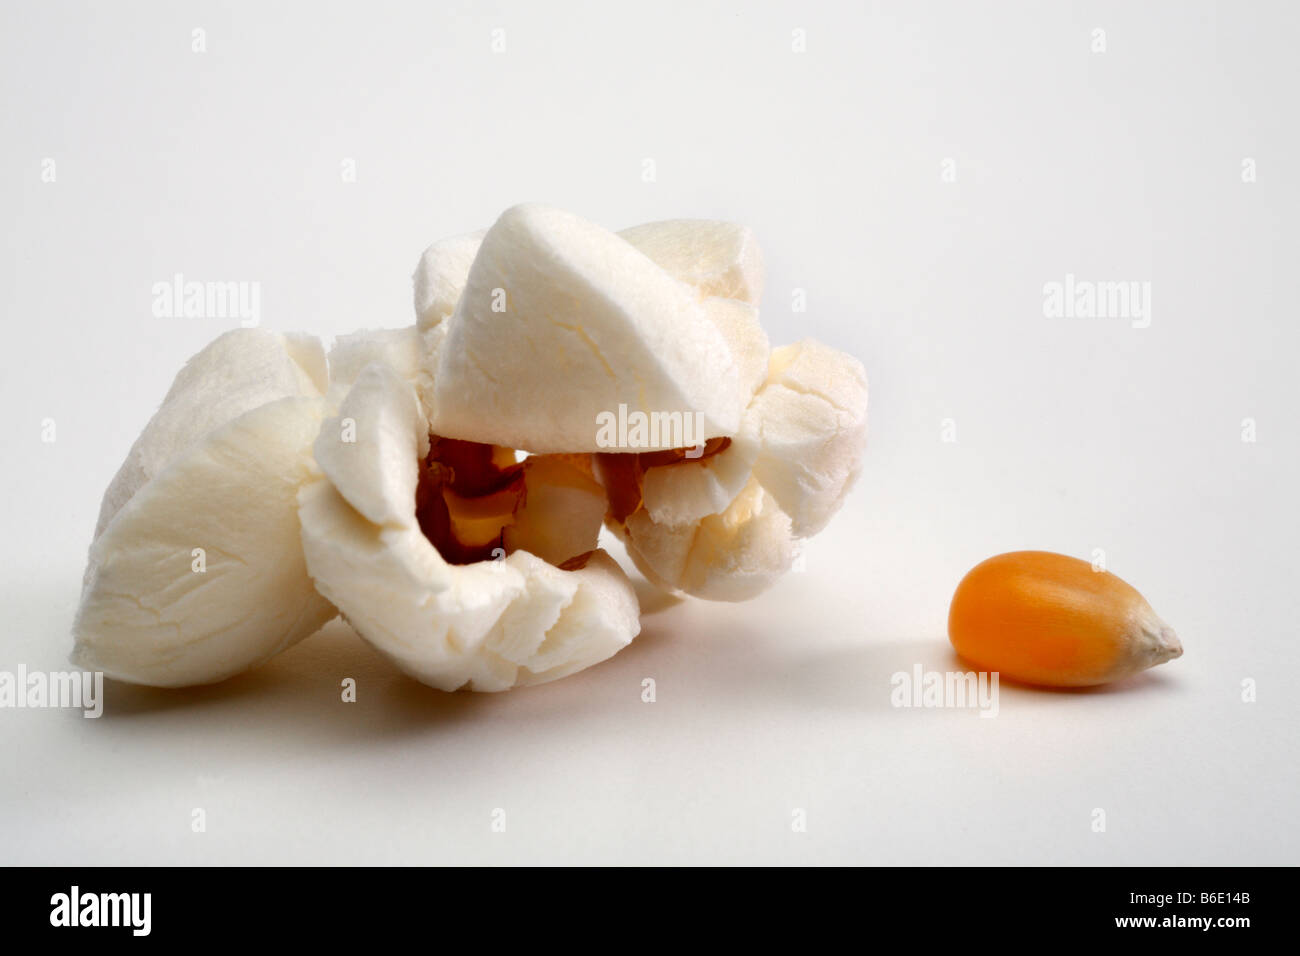 Popped popcorn and unpopped kernel close up Stock Photo